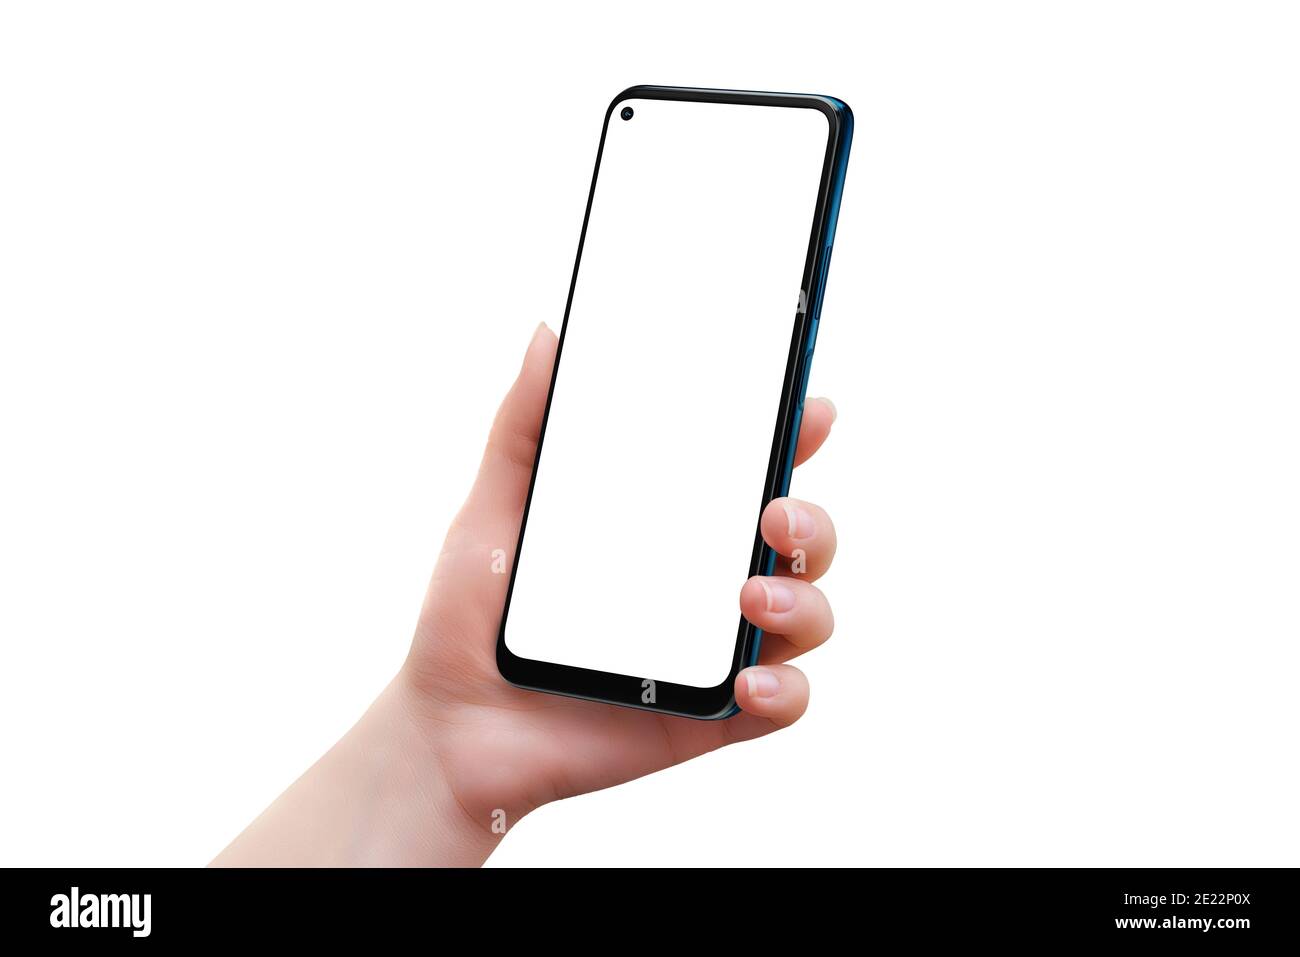 Isolated smart phone in woman hand. Right side position. Modern smart phone with round edges and camera built into the display. Soft retouched hand Stock Photo